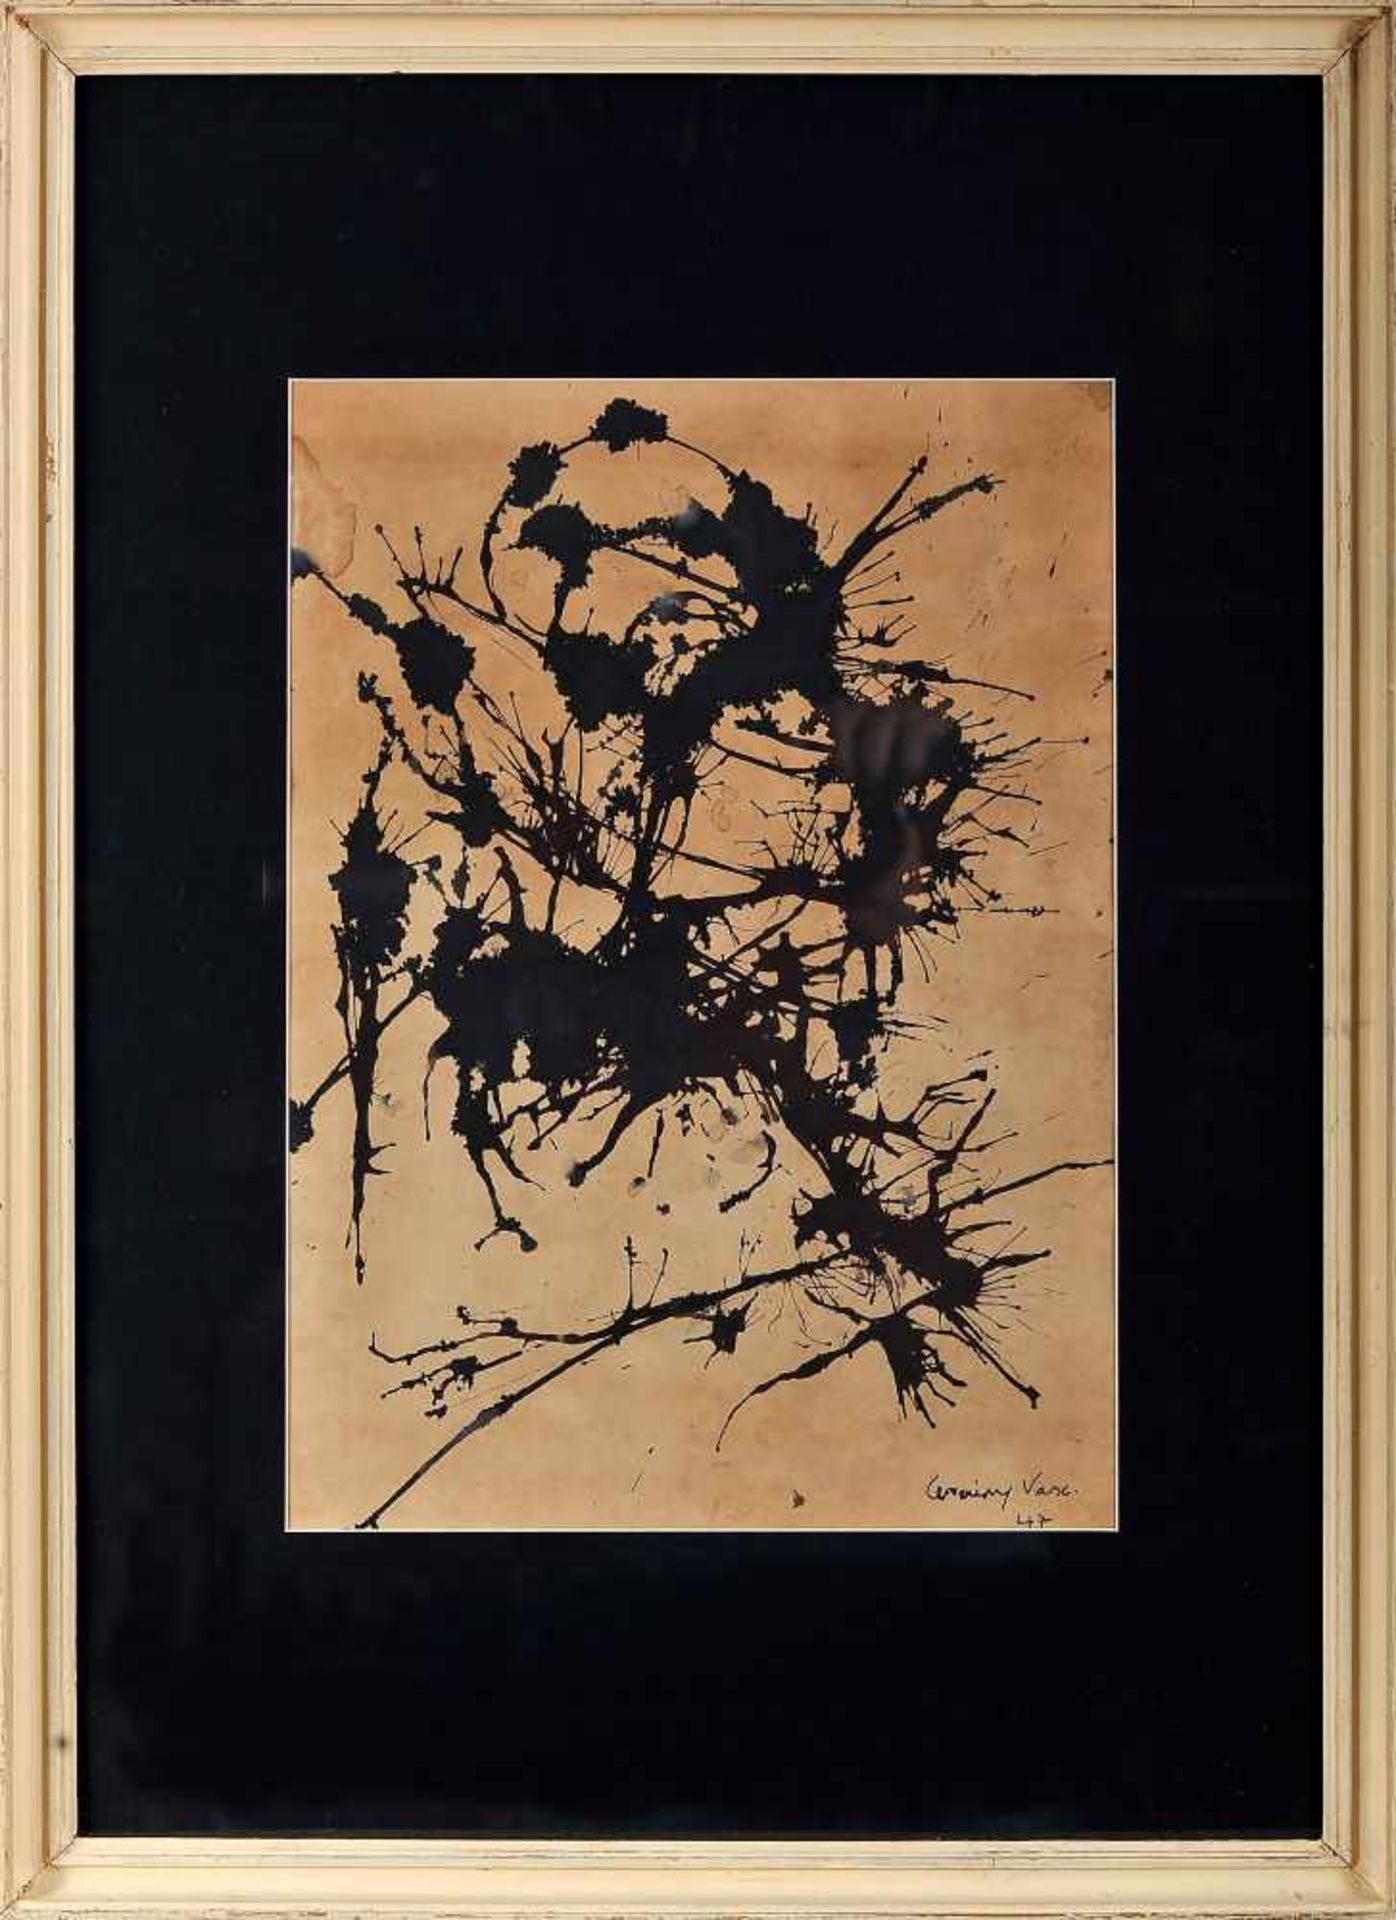 MÁRIO CESARINY - 1923-2006, Untitled, India ink on paper, small moisture stains, signed and dated